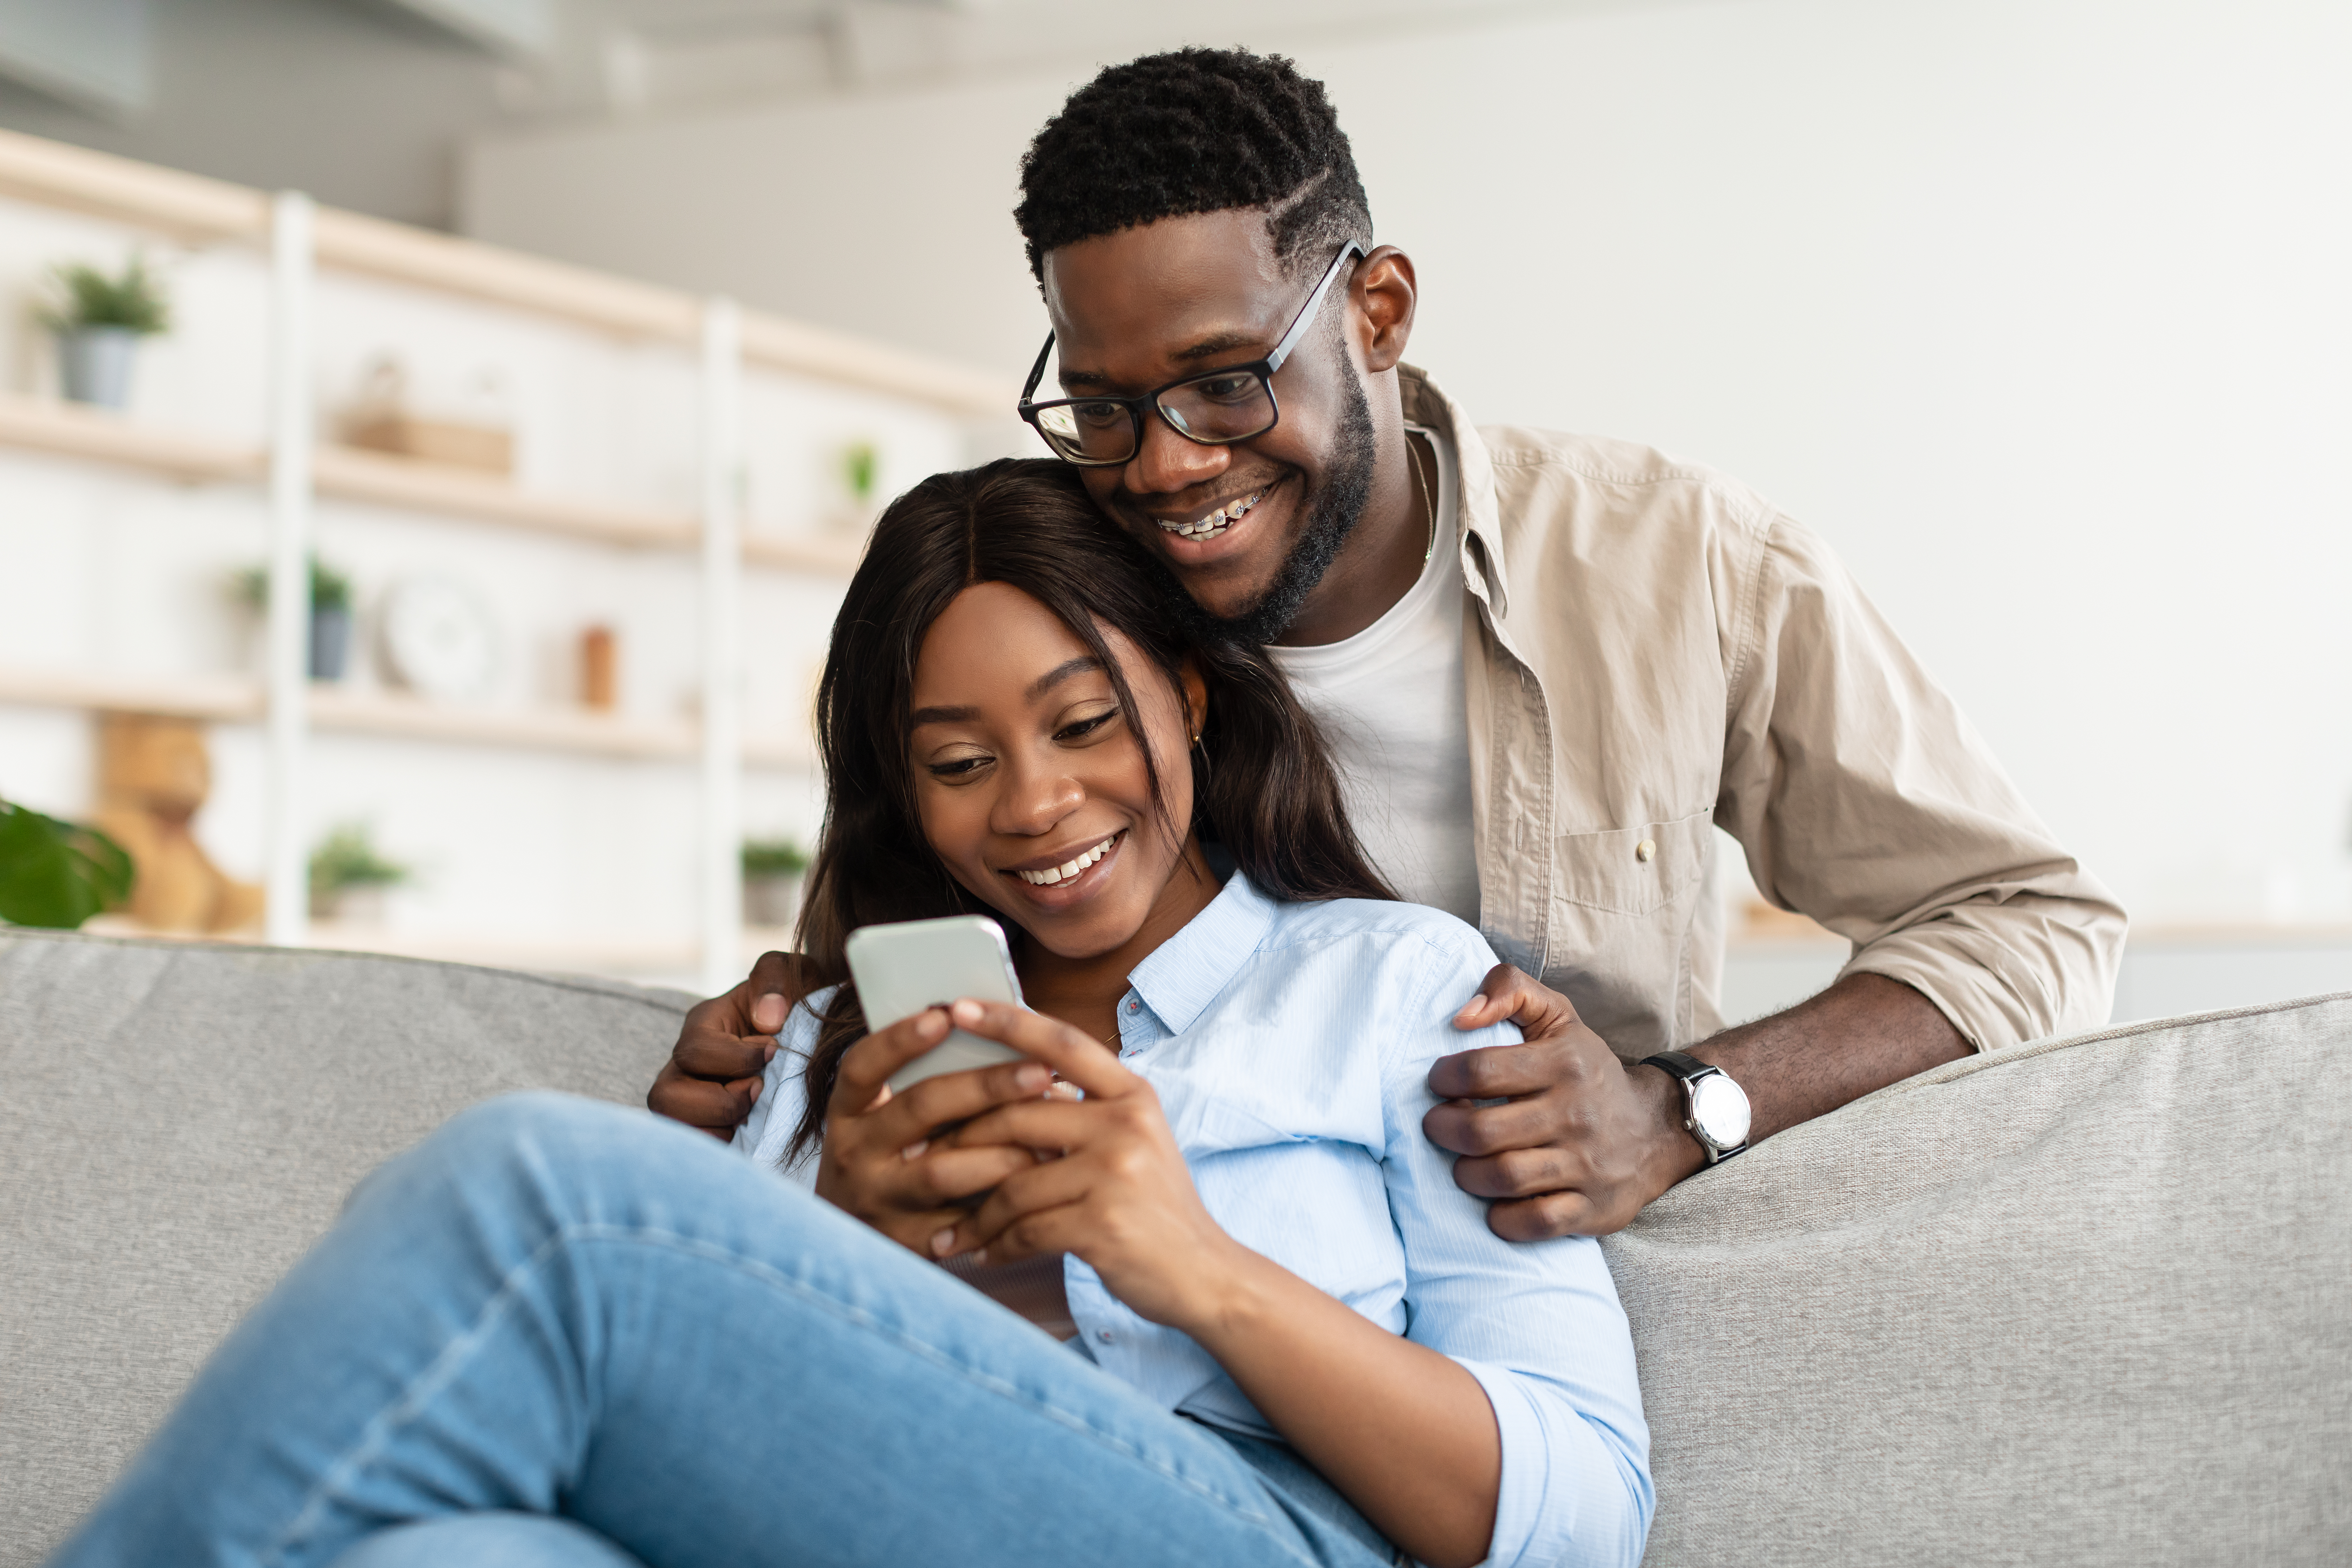 African american couple sitting on couch, using cellphone | Source: Getty Images